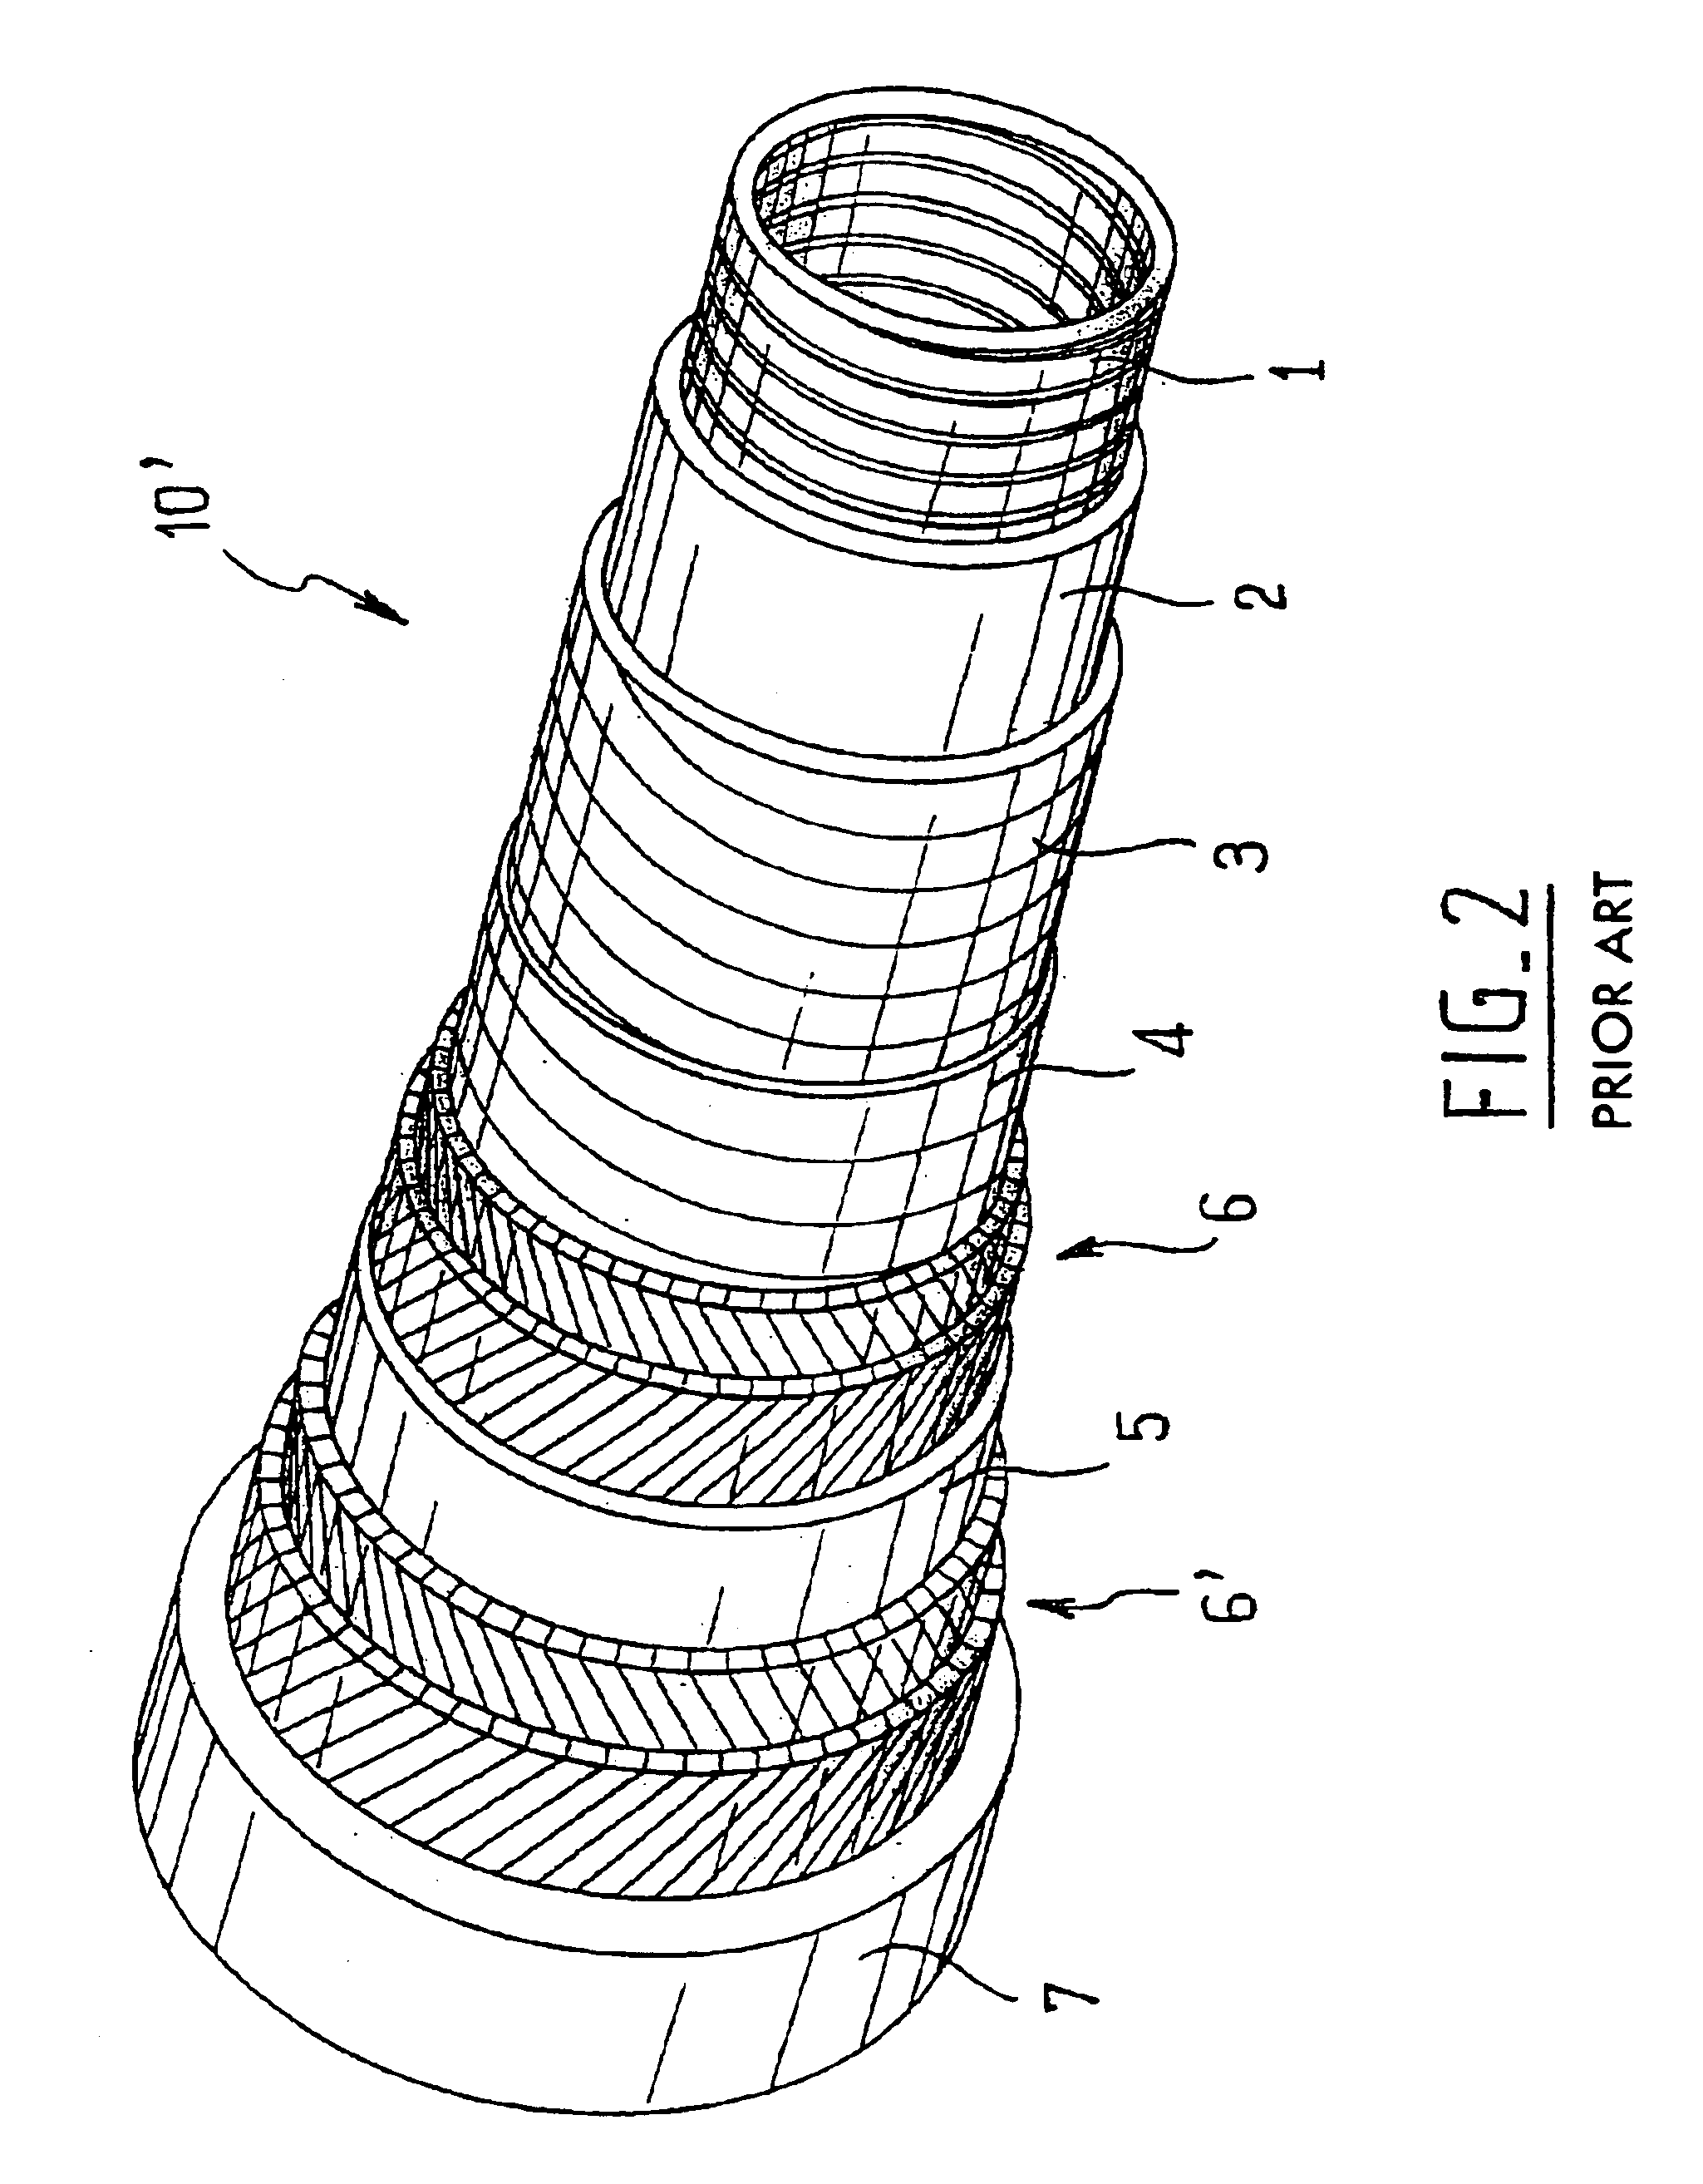 End-fitting for flexible pipe